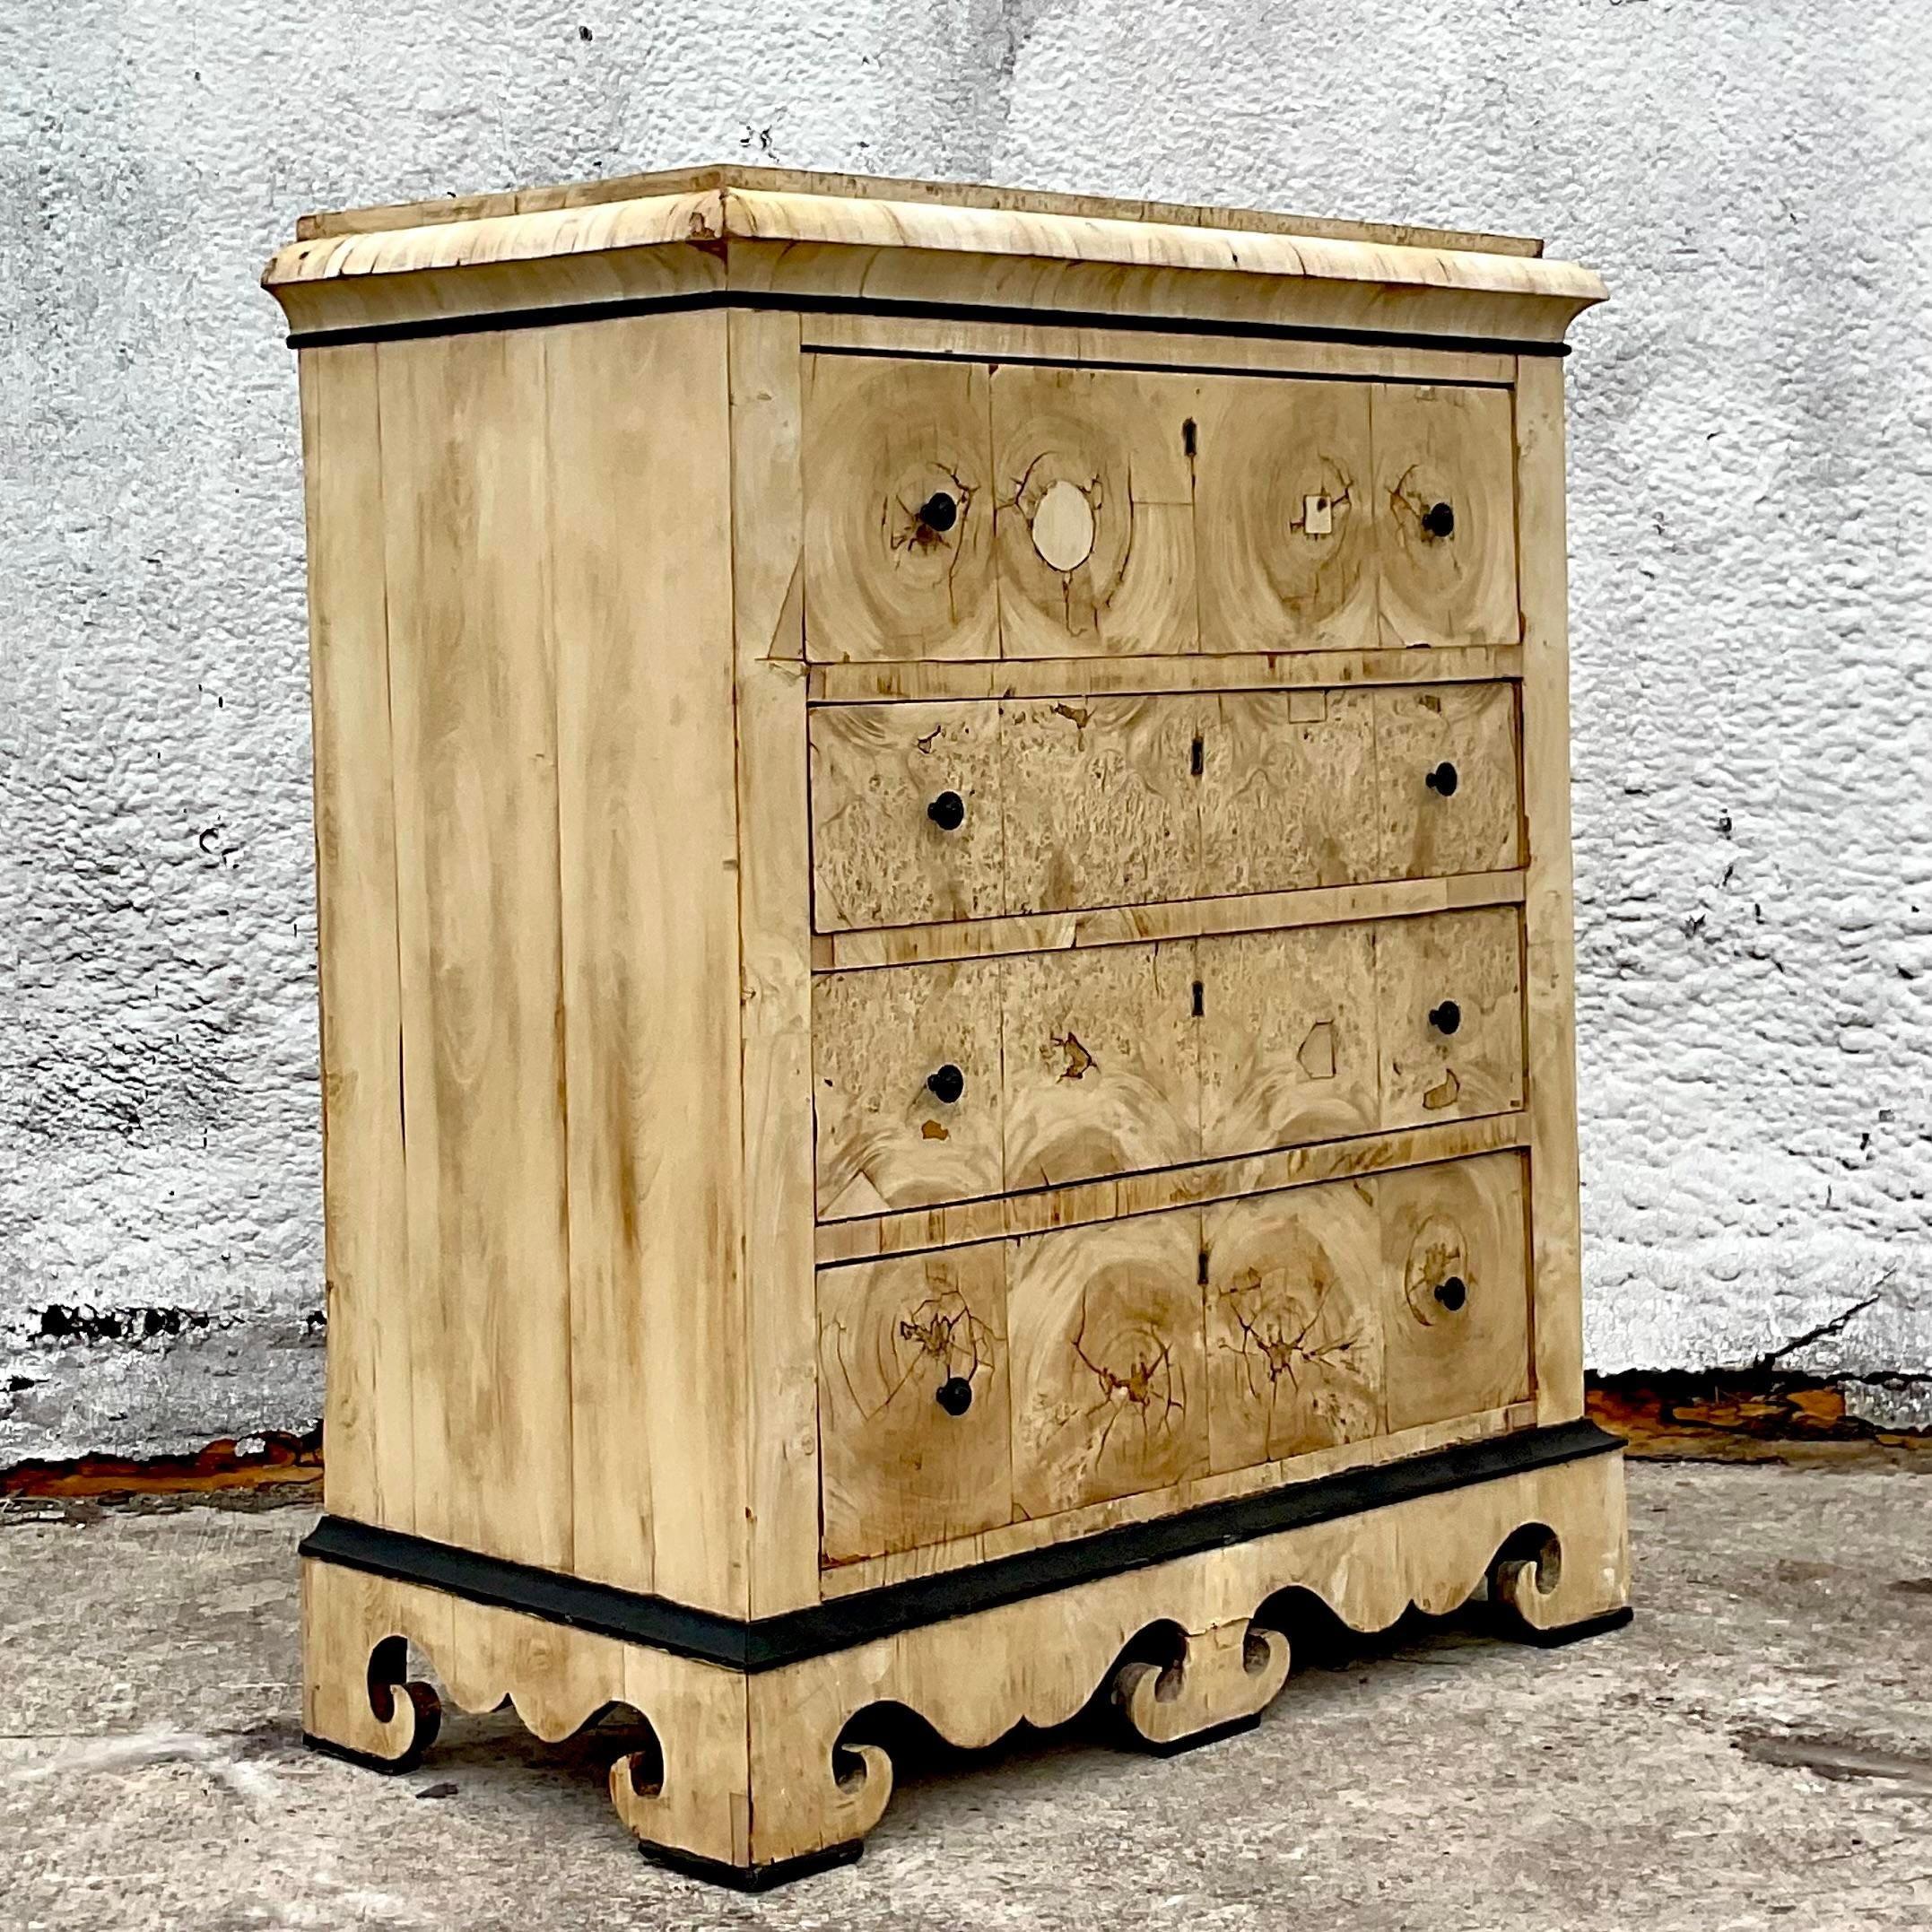 A stunning vintage English Colonial chest of drawers an incredible distressed and bleach finish on a Burl wood cabinet. Gorgeous wood grain detail. A really special piece. Acquired from a Palm Beach estate. 